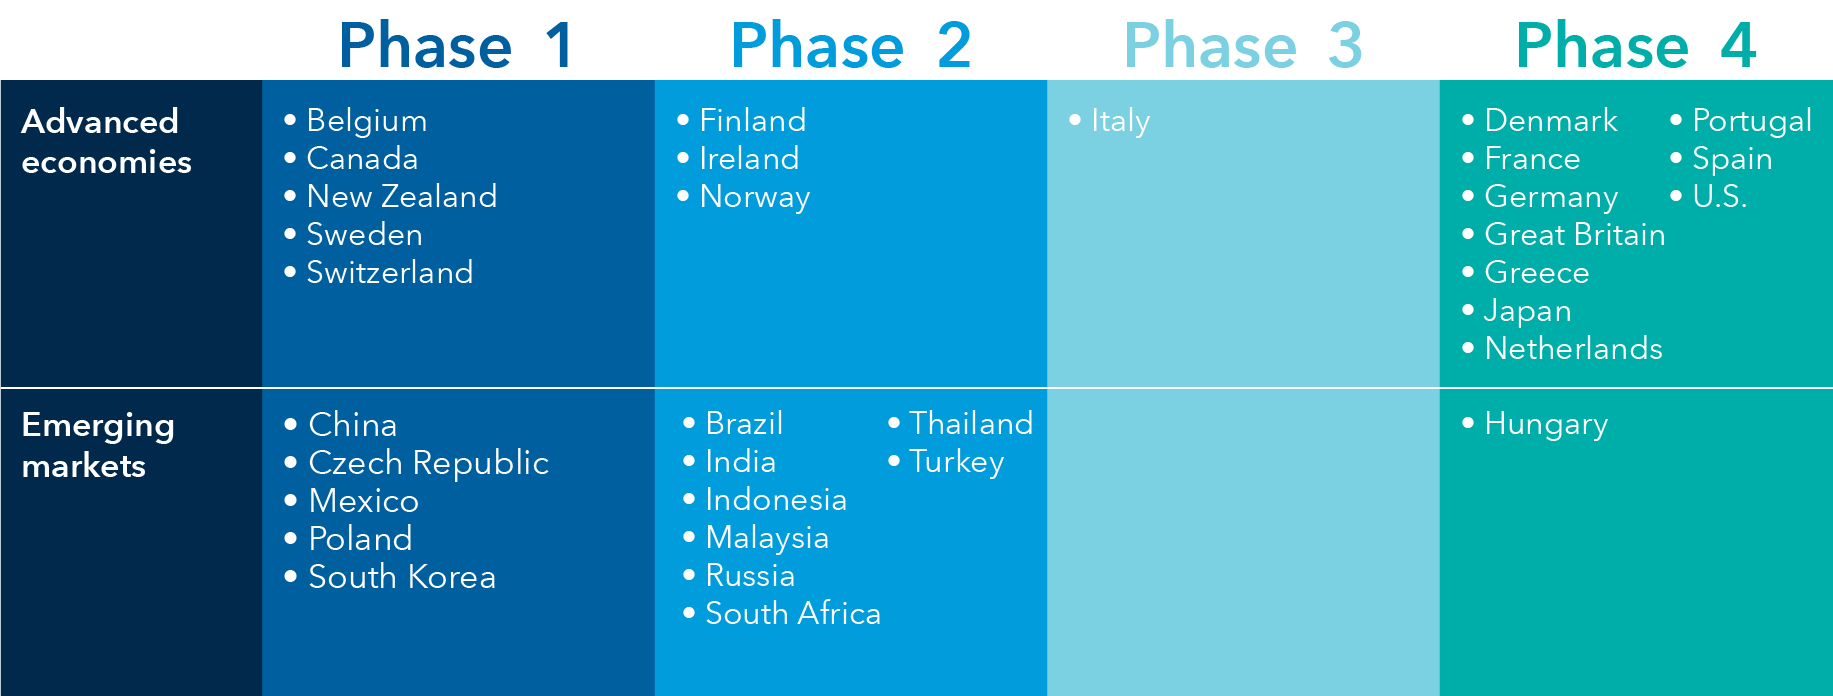 Table lists the advance economies and emerging markets in each financial cycle as of September 30, 2020. Countries in phase 1 include advanced economies Belgium, Canada, New Zealand, Sweden and Switzerland, and emerging markets China, Czech Republic, Mexico, Poland and South Korea. Countries in phase 2 include advanced economies Finland, Ireland and Norway, and emerging markets Brazil, India, Indonesia, Malaysia, Russia, South Africa, Thailand and Turkey. Countries in phase 3 include advanced economy Italy. Countries in phase 4 include advanced economies Denmark, France, Germany, Great Britain, Greece, Japan, Netherlands, Portugal, Spain and the U.S., and emerging market Hungary. 